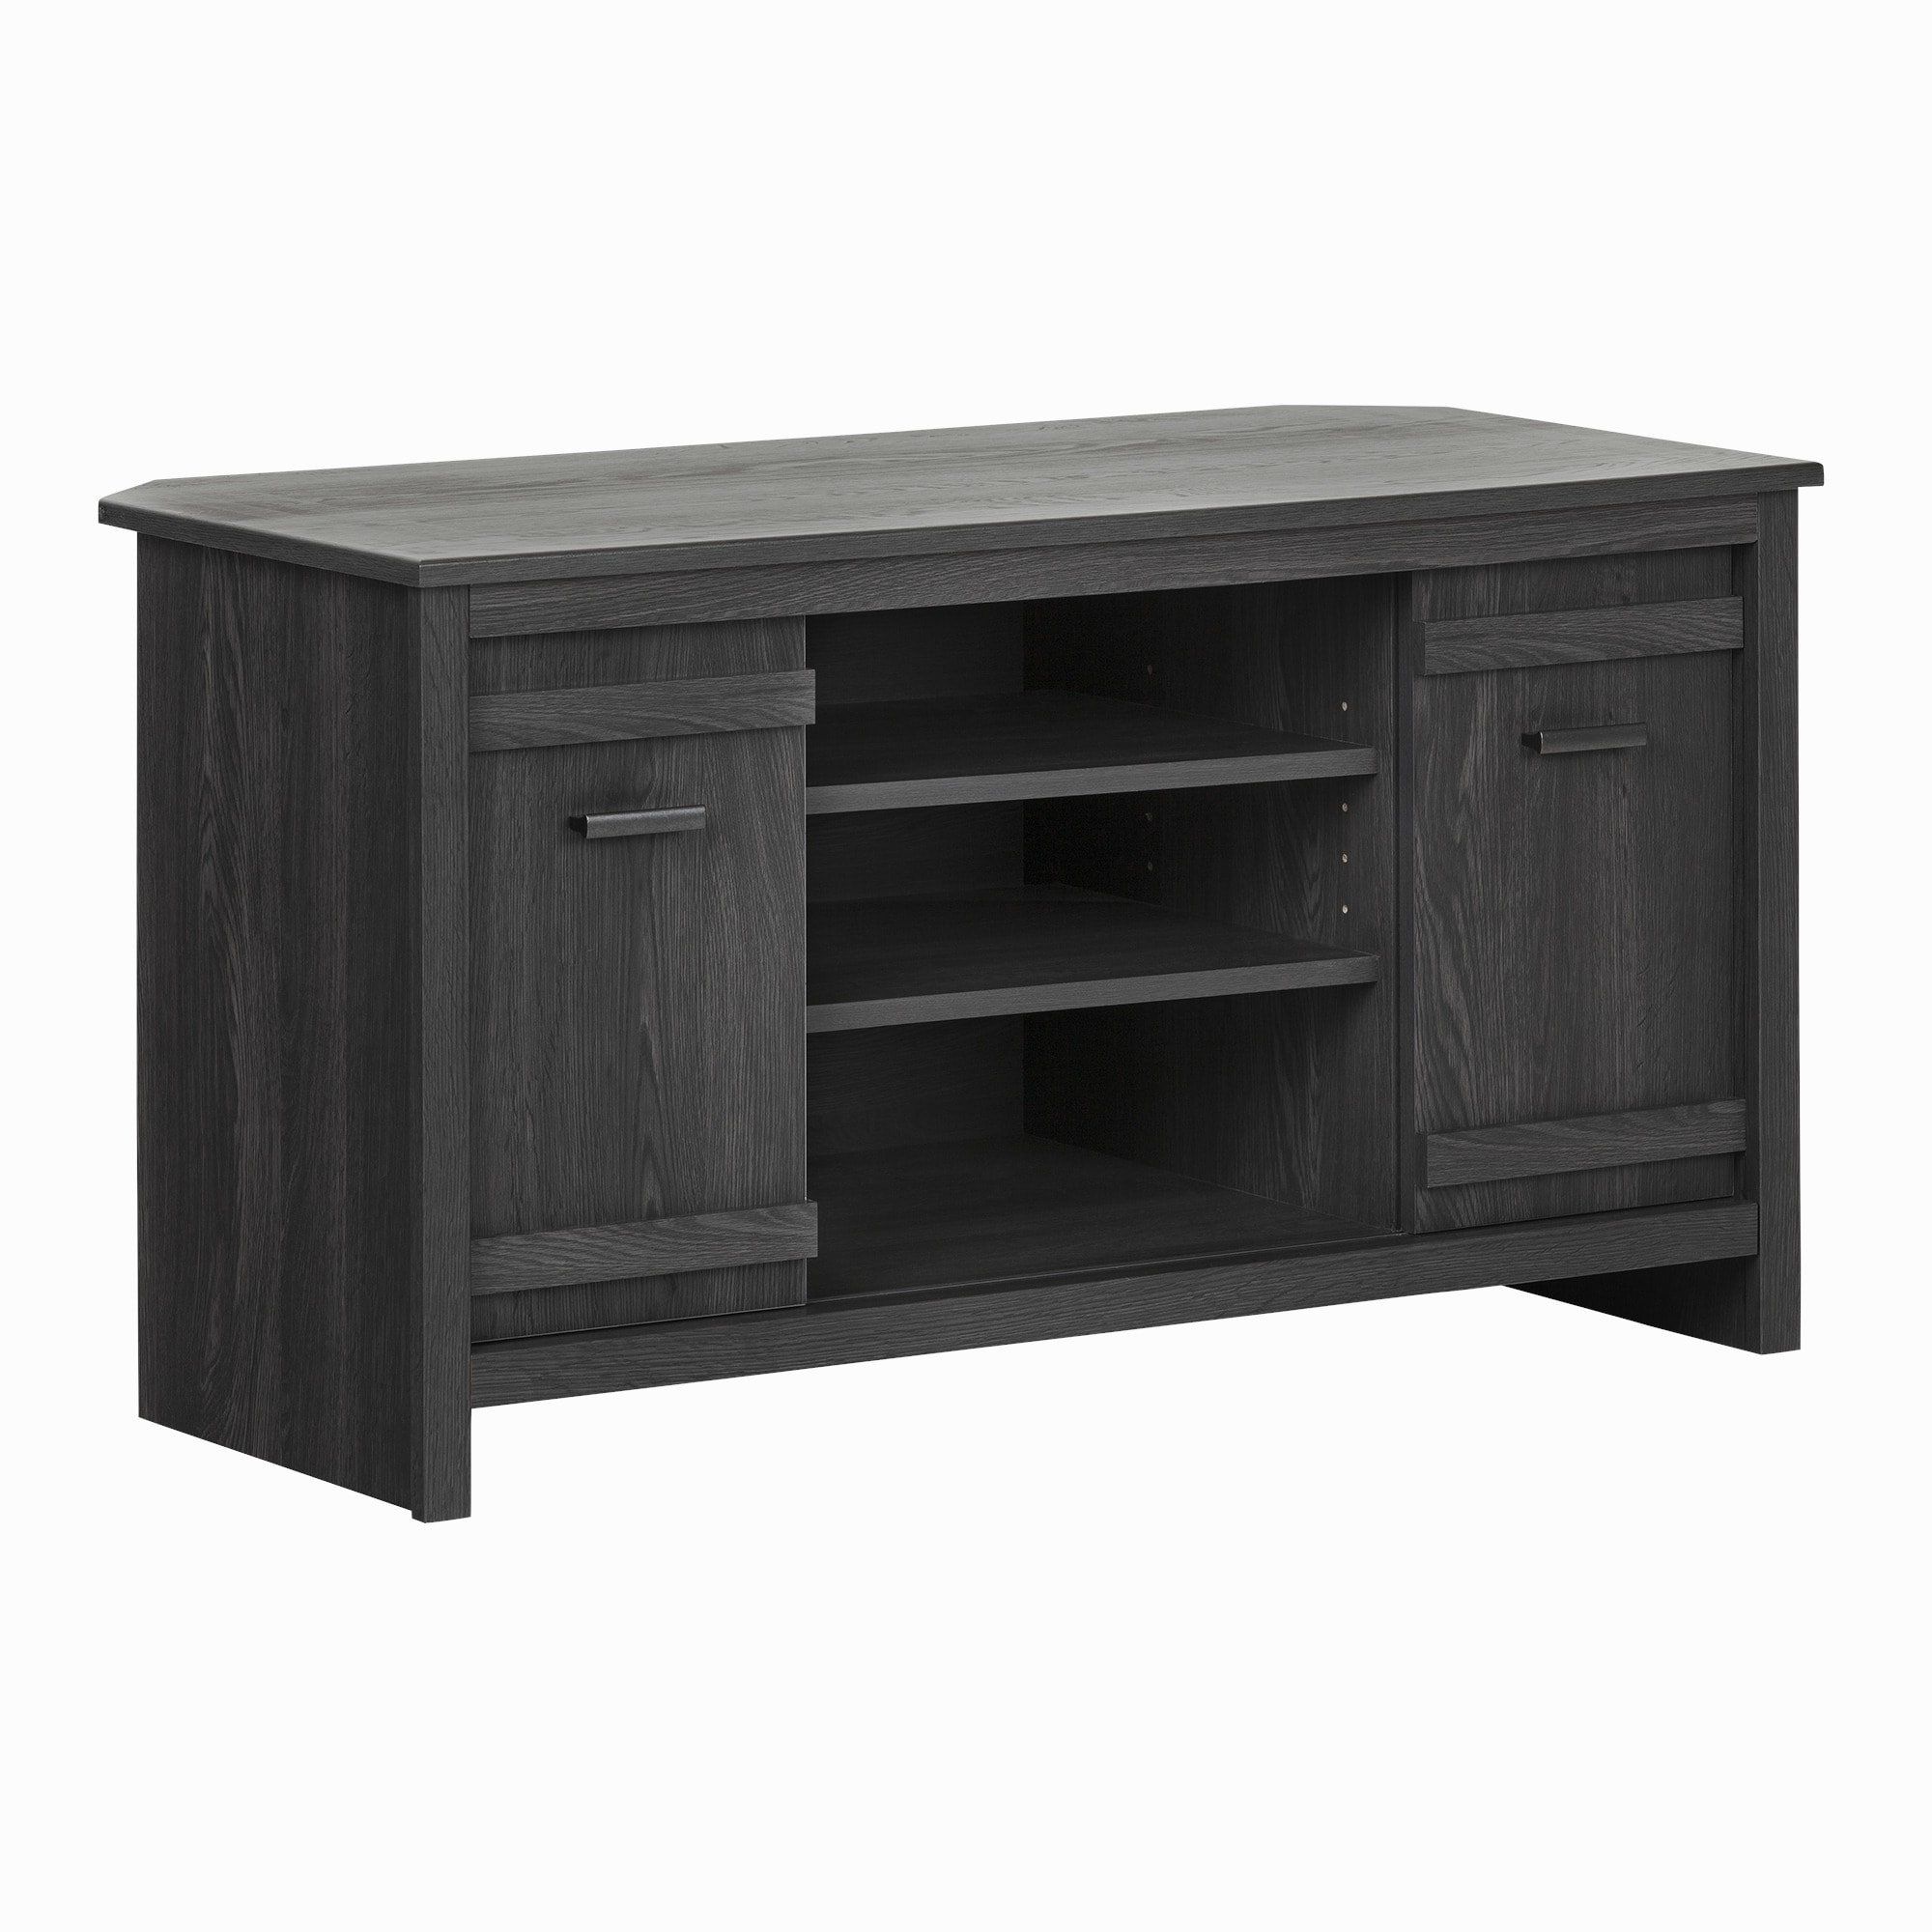 Well Known Shop South Shore Exhibit Corner Tv Stand – Free Shipping Today Within Grey Corner Tv Stands (View 5 of 20)